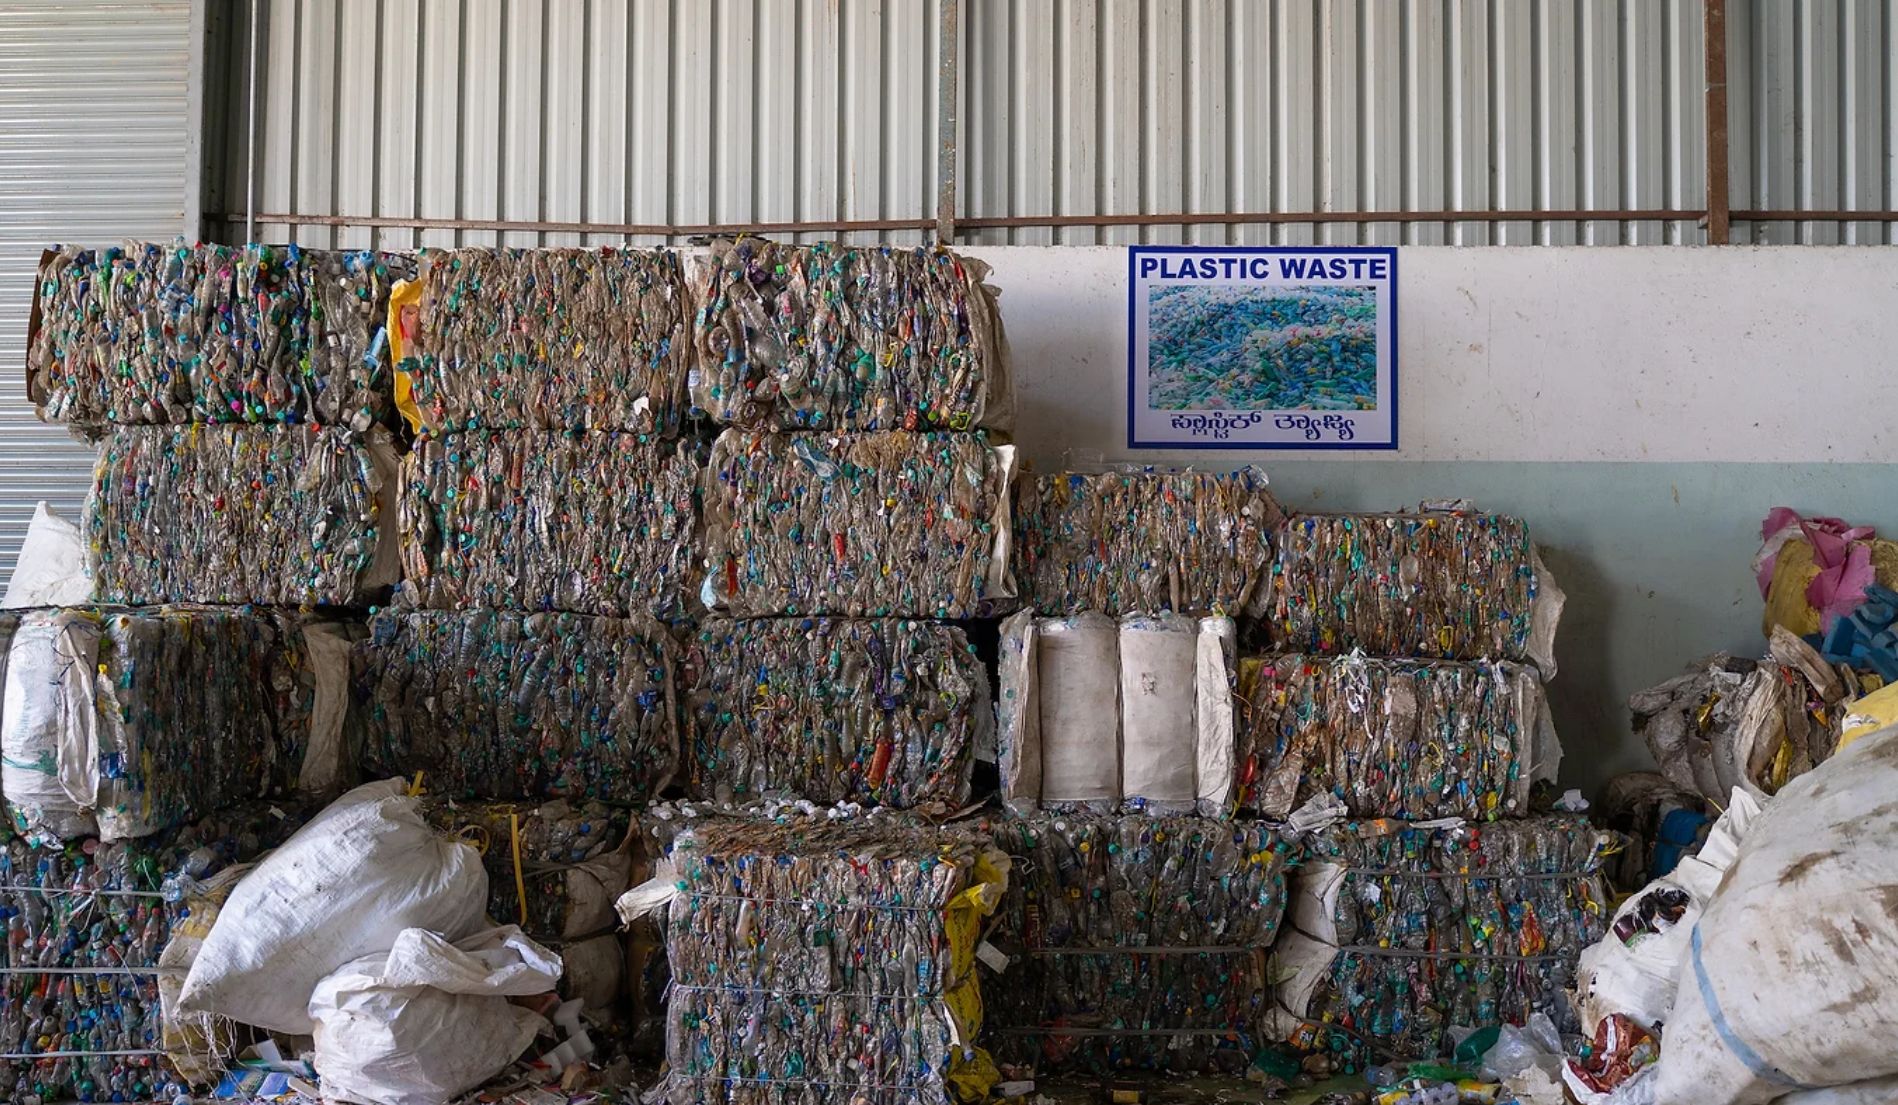 Photograph of processed plastic waste